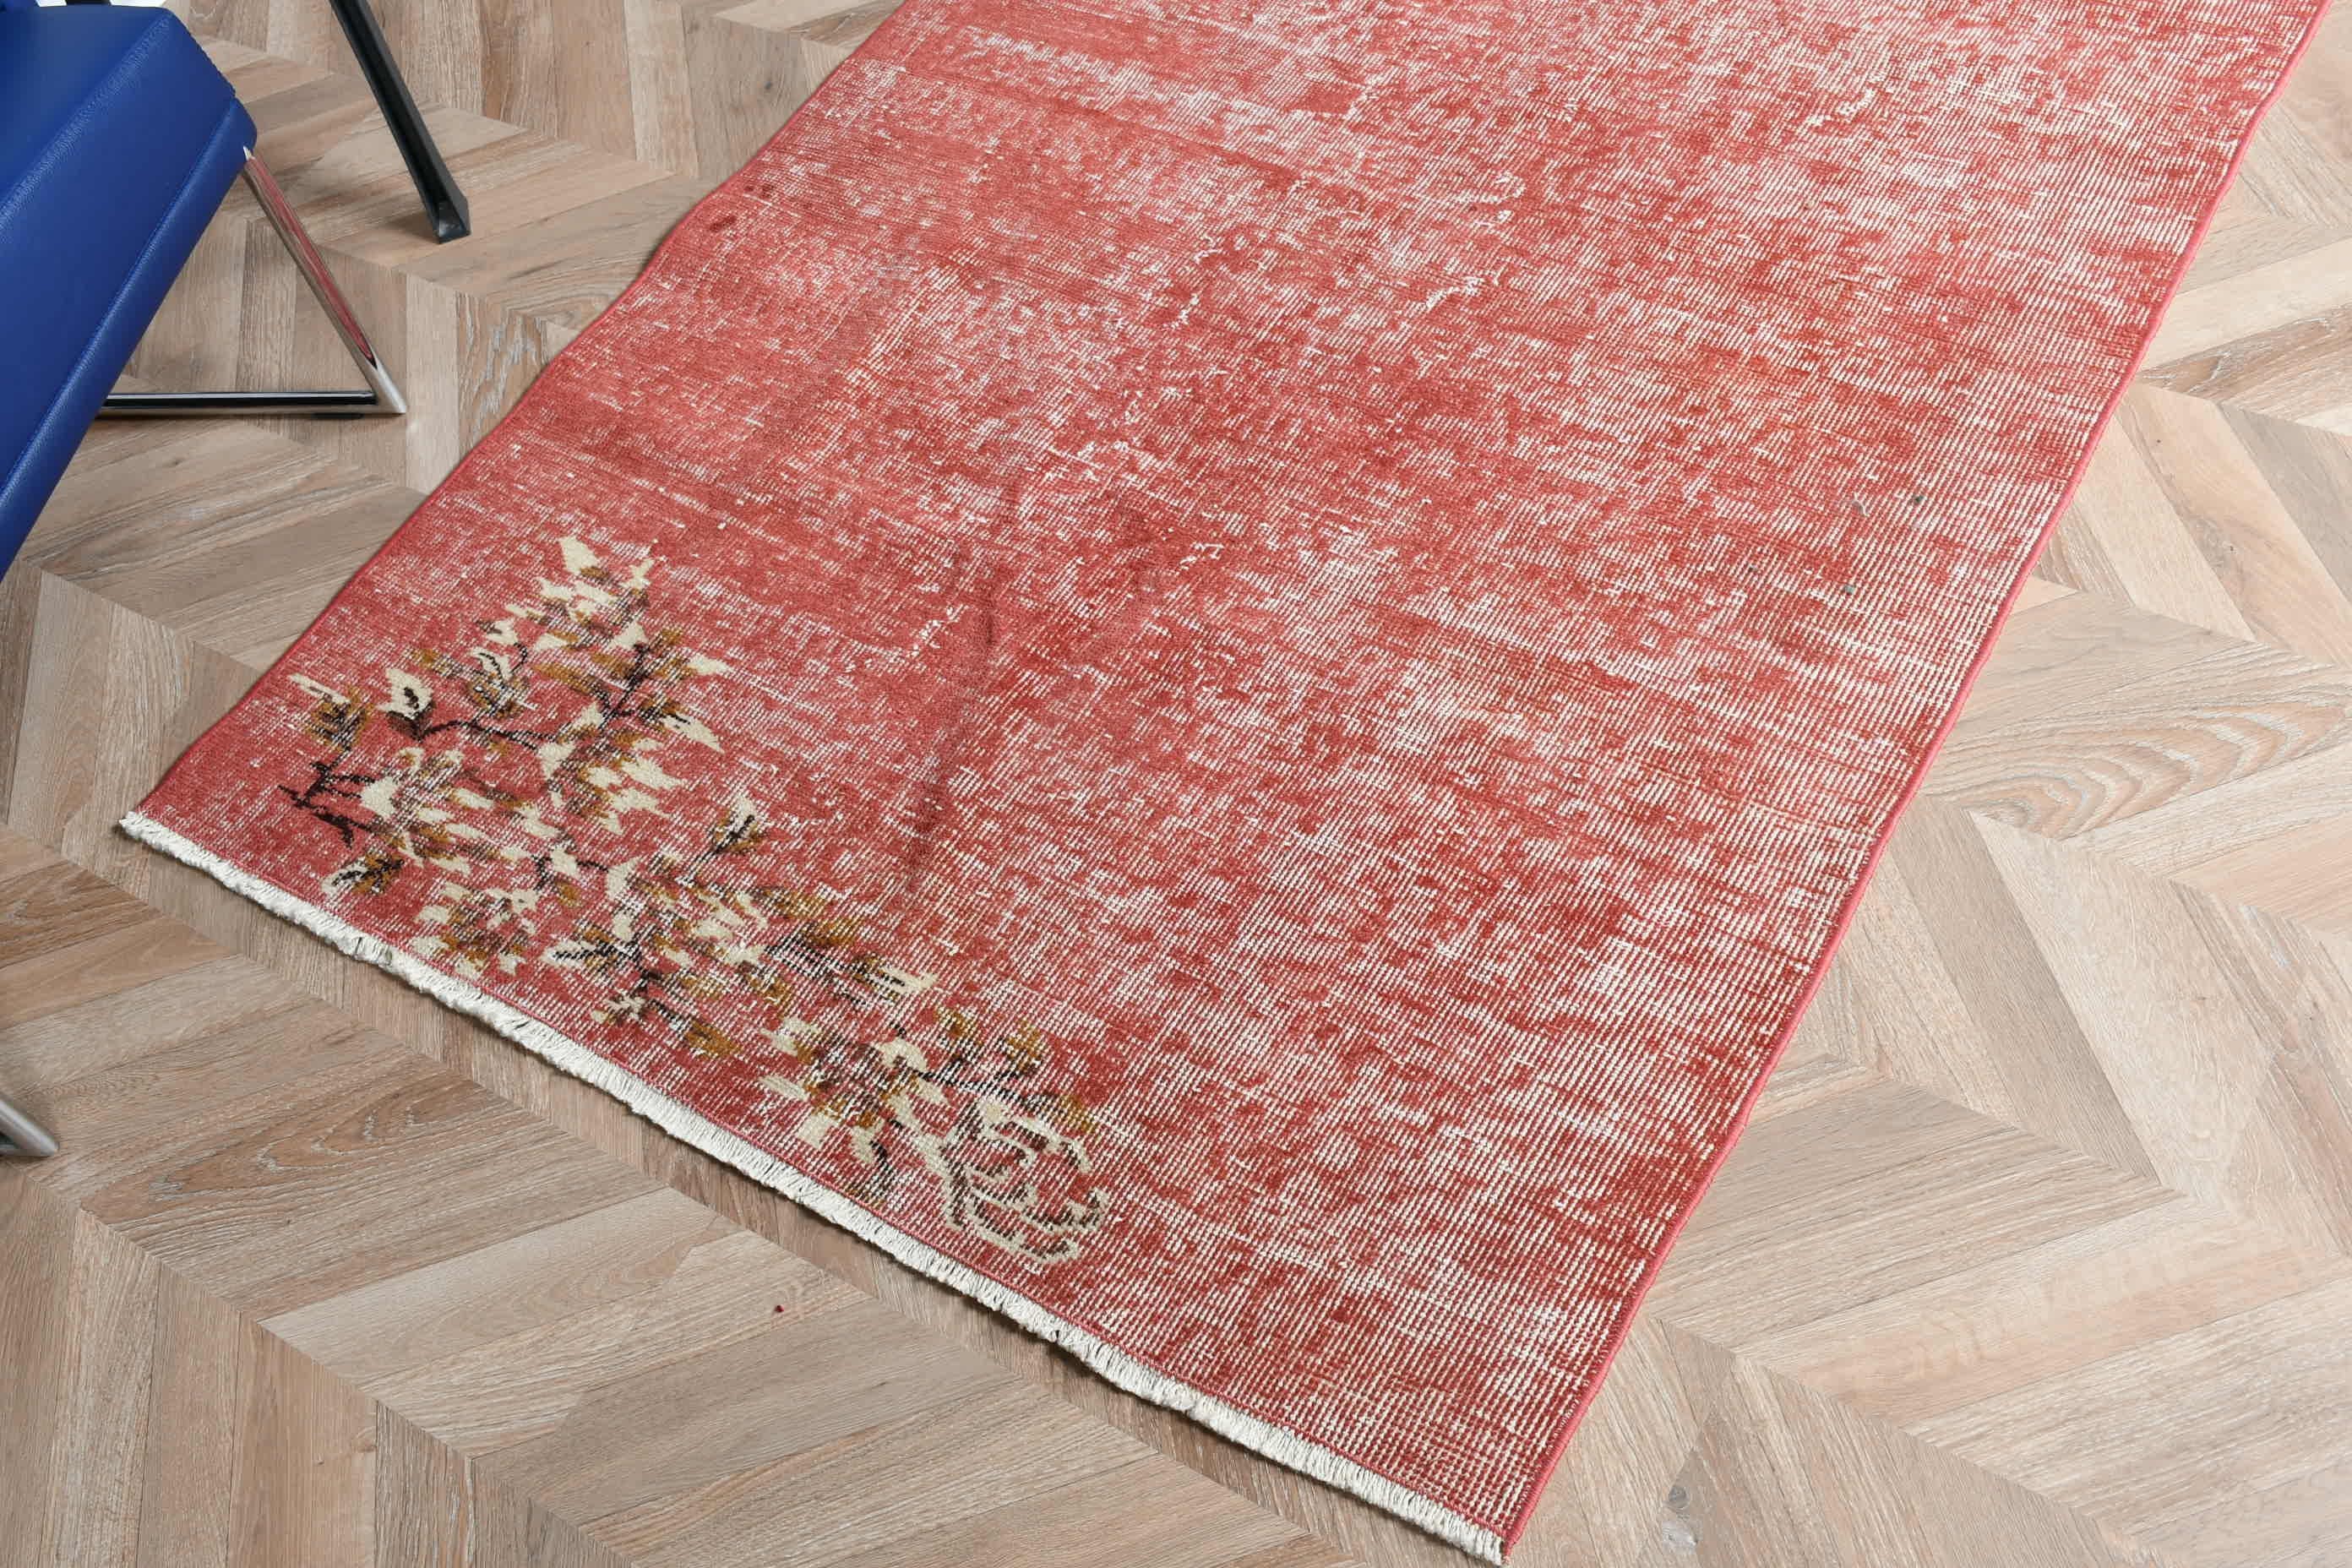 Rugs for Entry, Vintage Decor Rug, 3.6x6.1 ft Accent Rug, Red Wool Rugs, Kitchen Rug, Bedroom Rugs, Turkish Rug, Vintage Rugs, Antique Rug